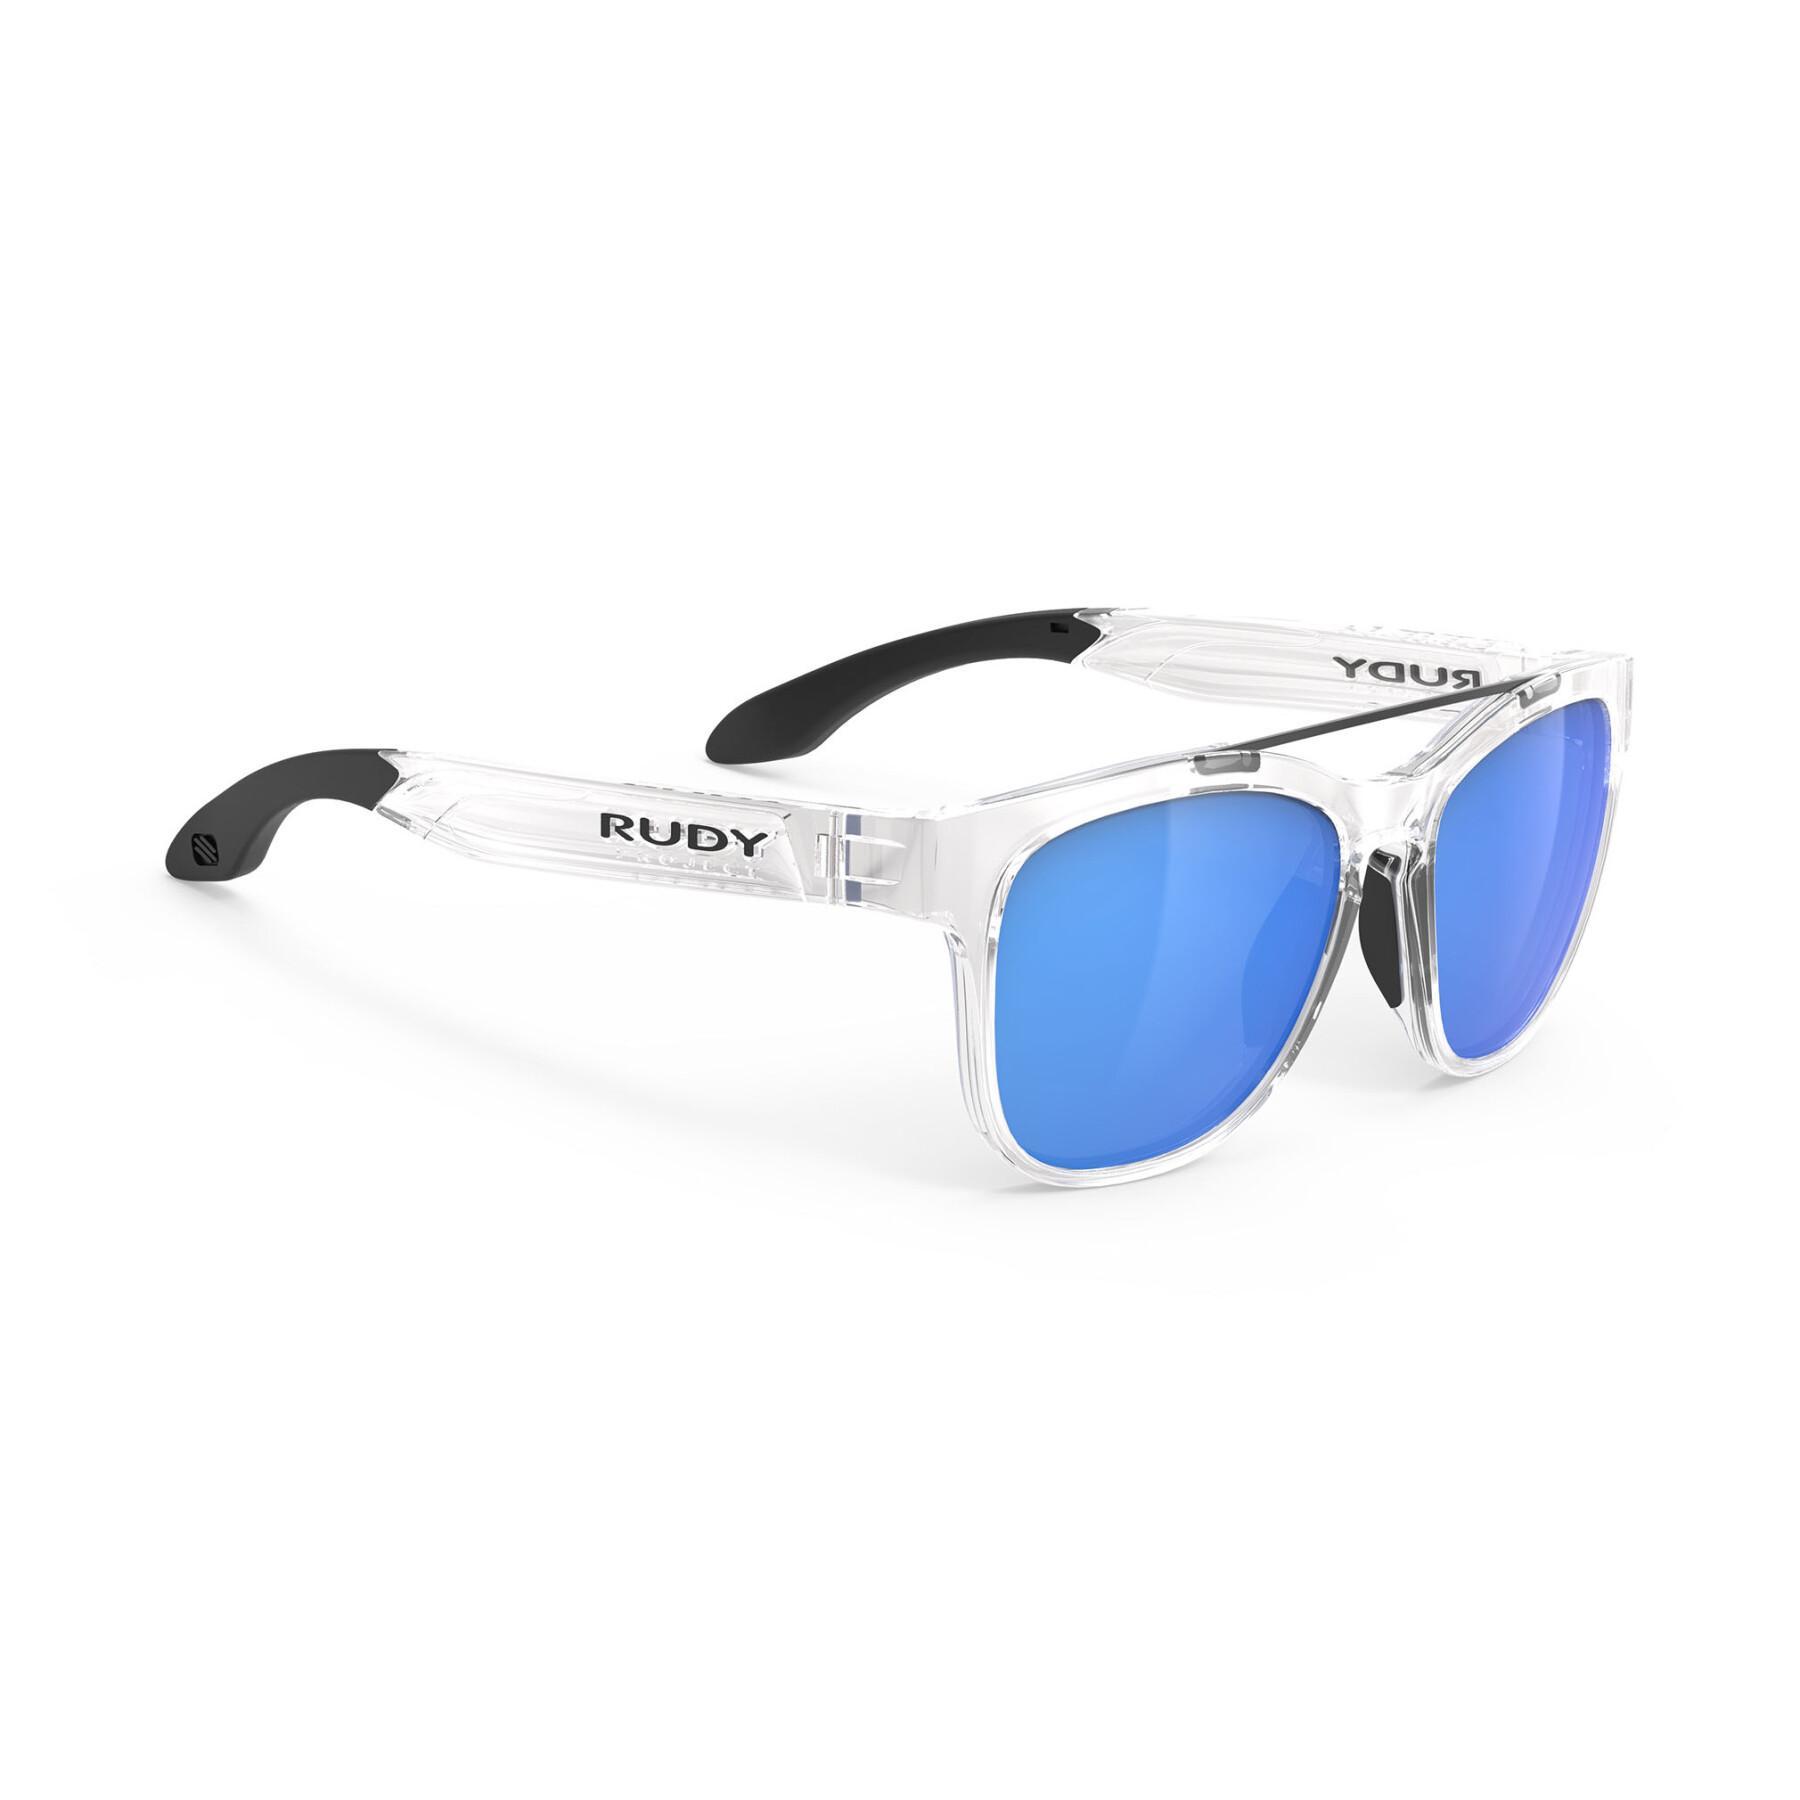 Sunglasses Rudy Project spinair 59